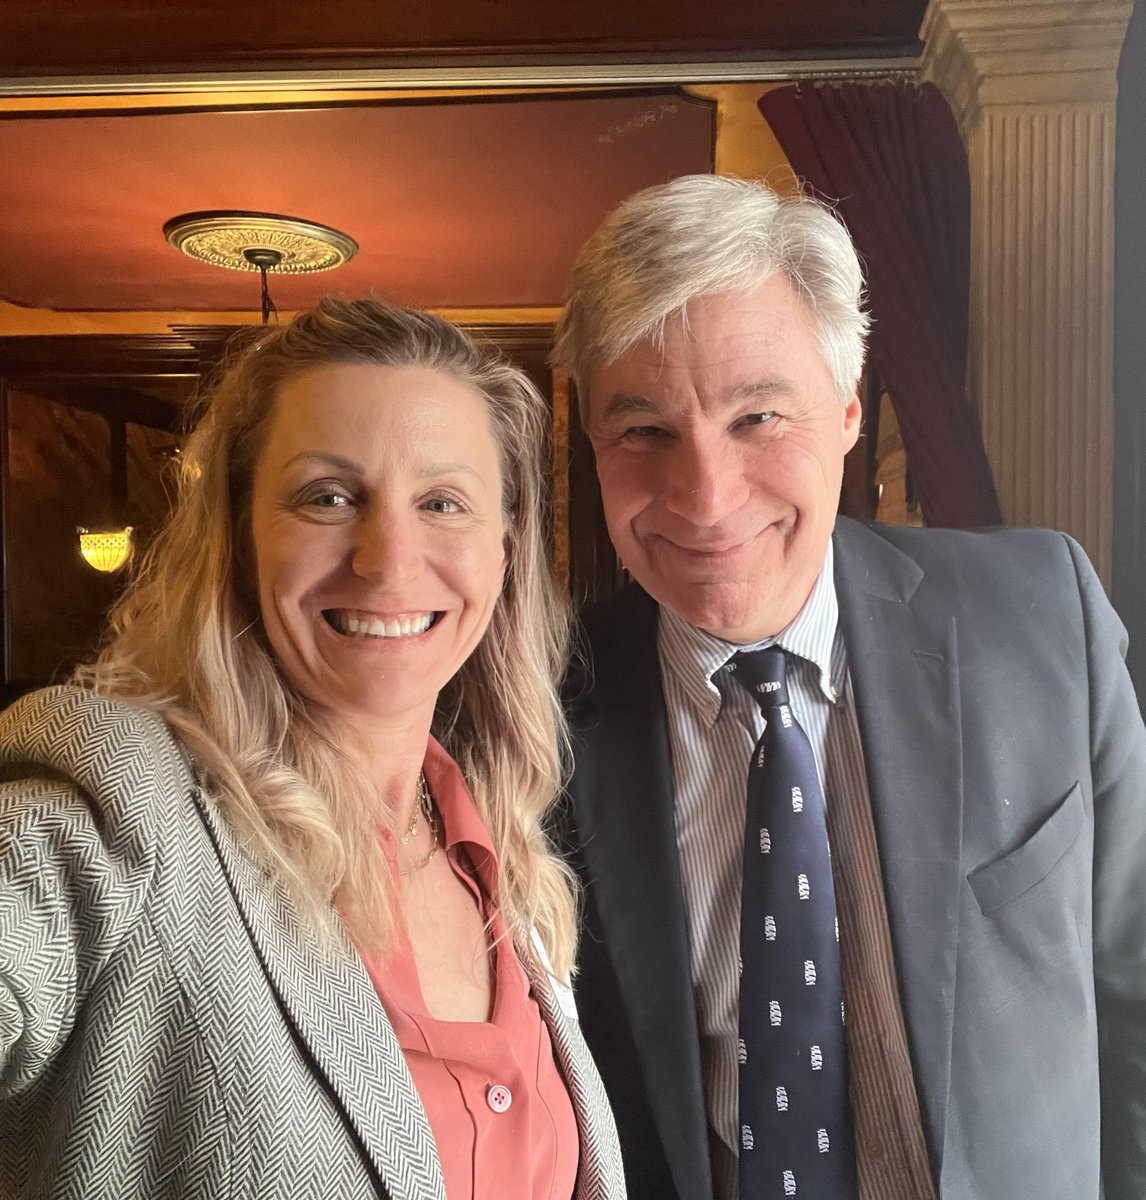 Recently, APTA RI President @MichelleECollie  met with @SenWhitehouse to discuss Medicare Reform, PT shortages and PTs role as a primary care provider. #PTAdvocacy